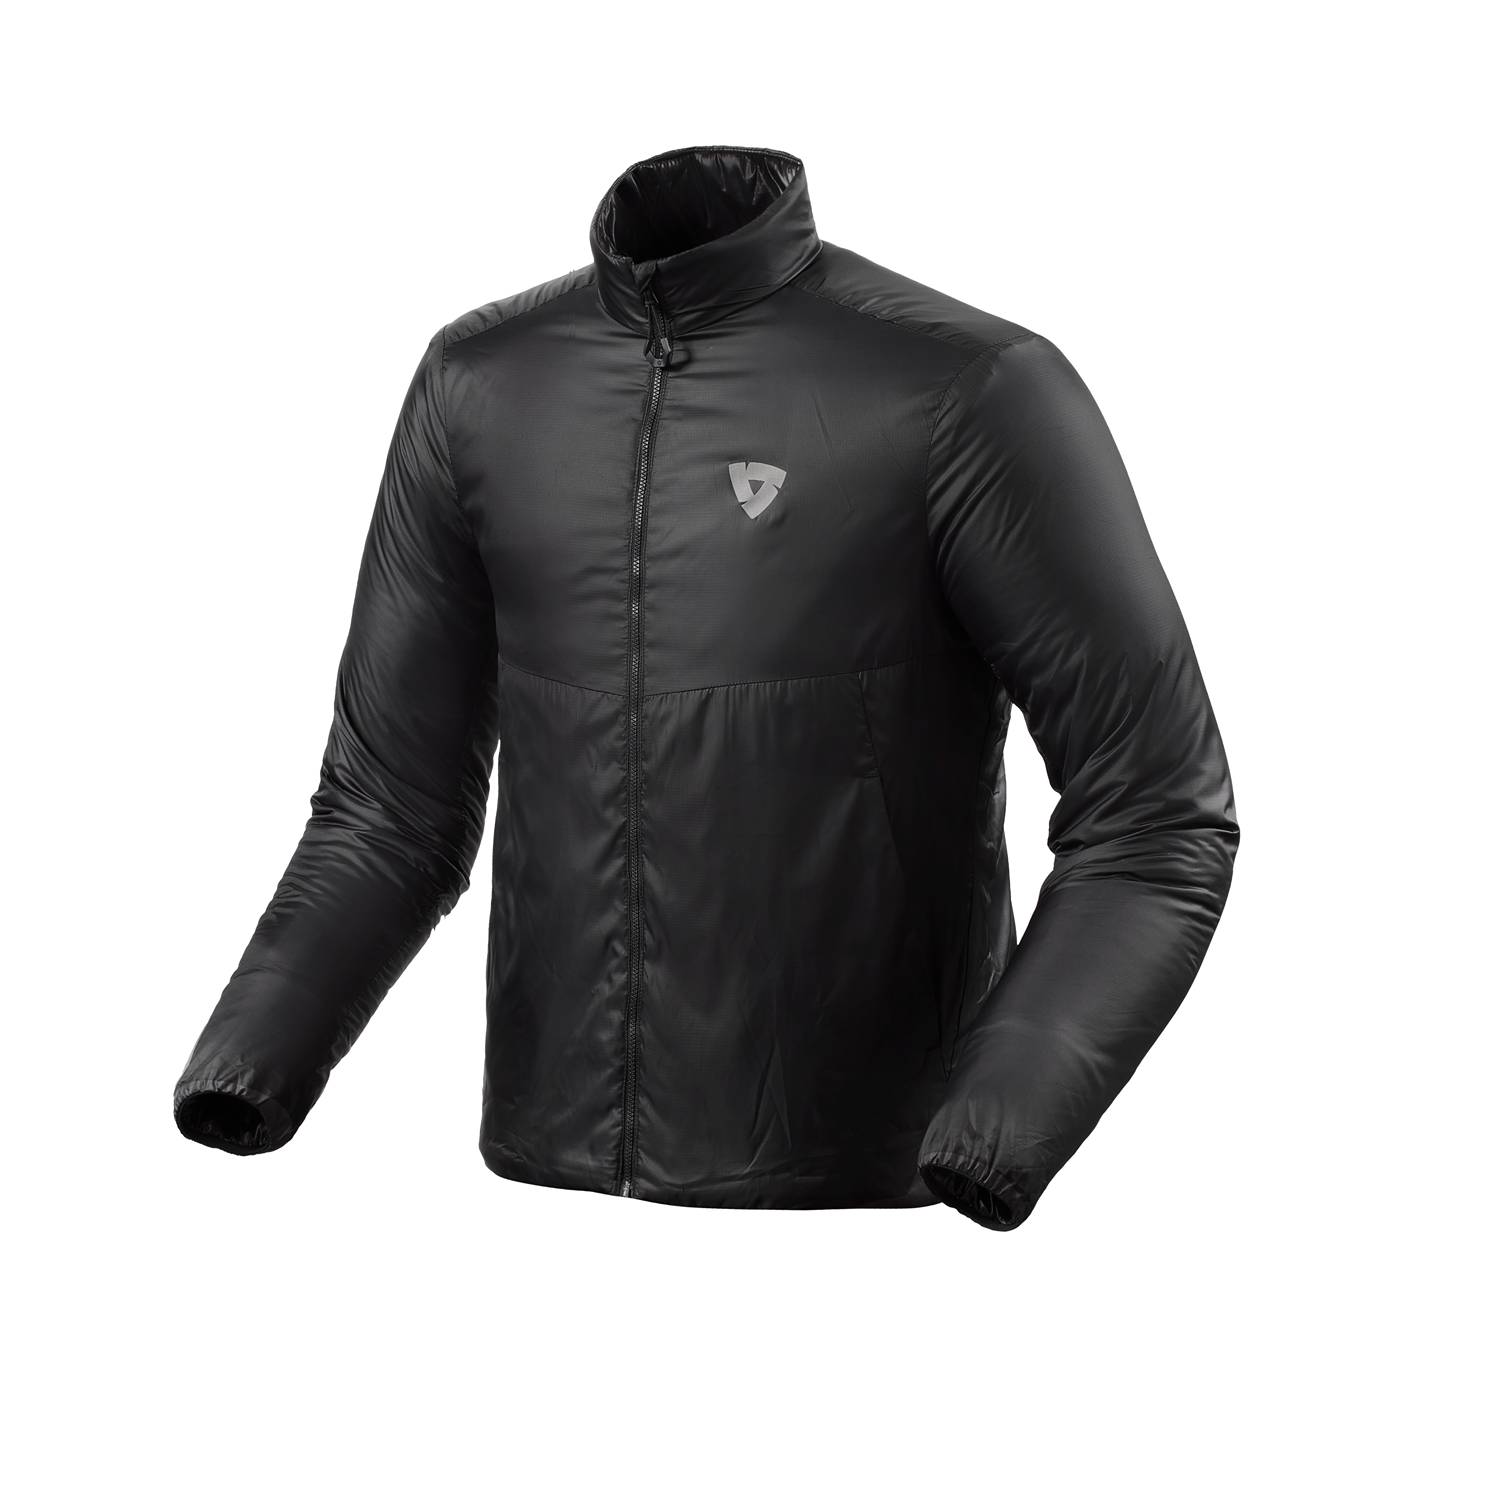 Image of REV'IT! Core 2 Mid Layer Jacket Black Size M ID 8700001372428